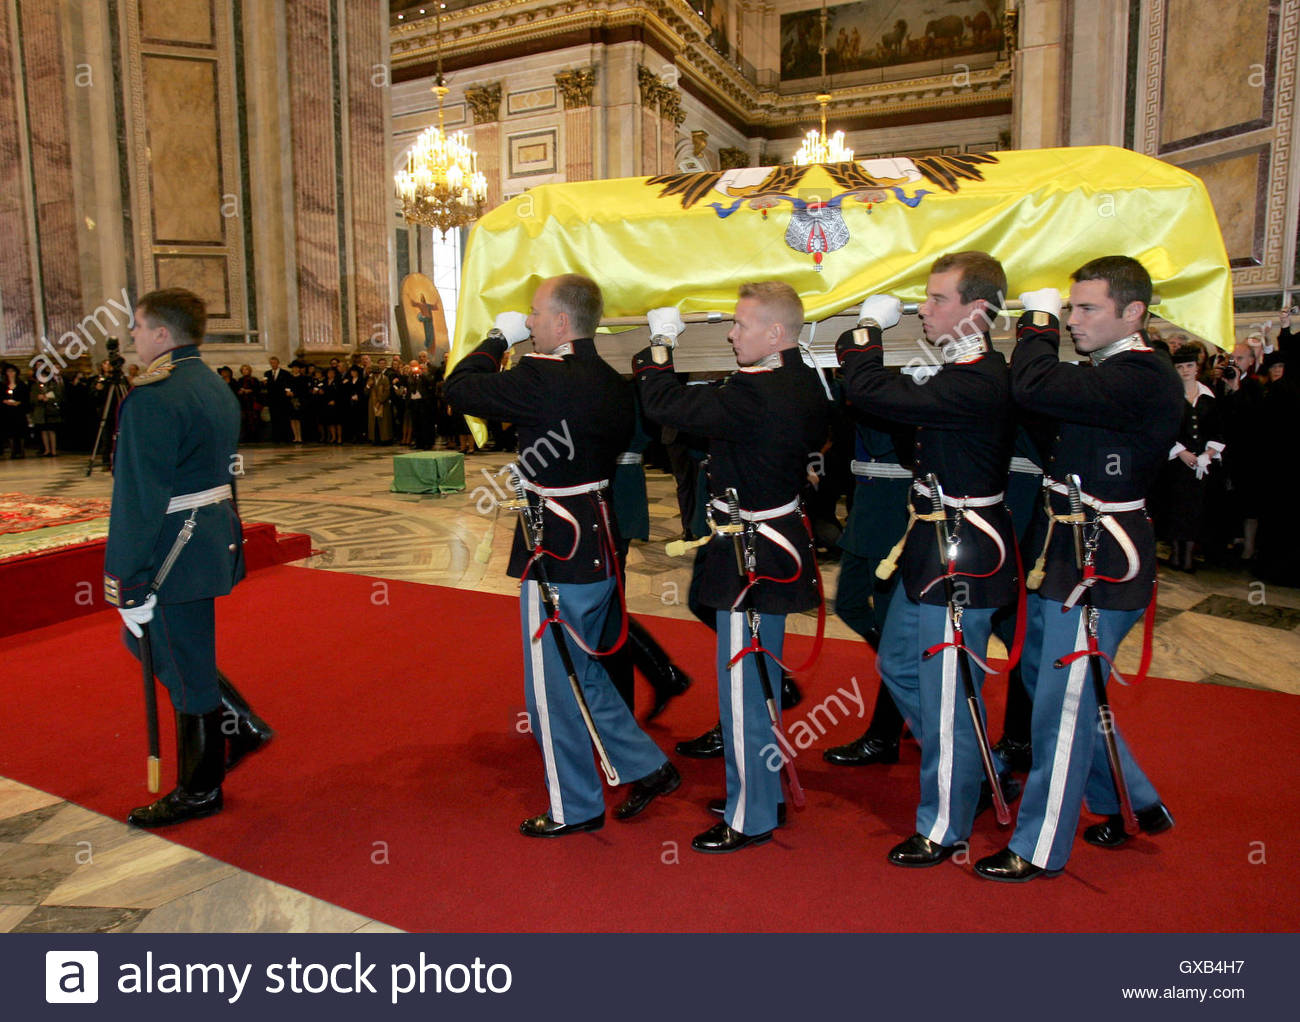 Image result for The Russian last Tsars remains brought back to Russia